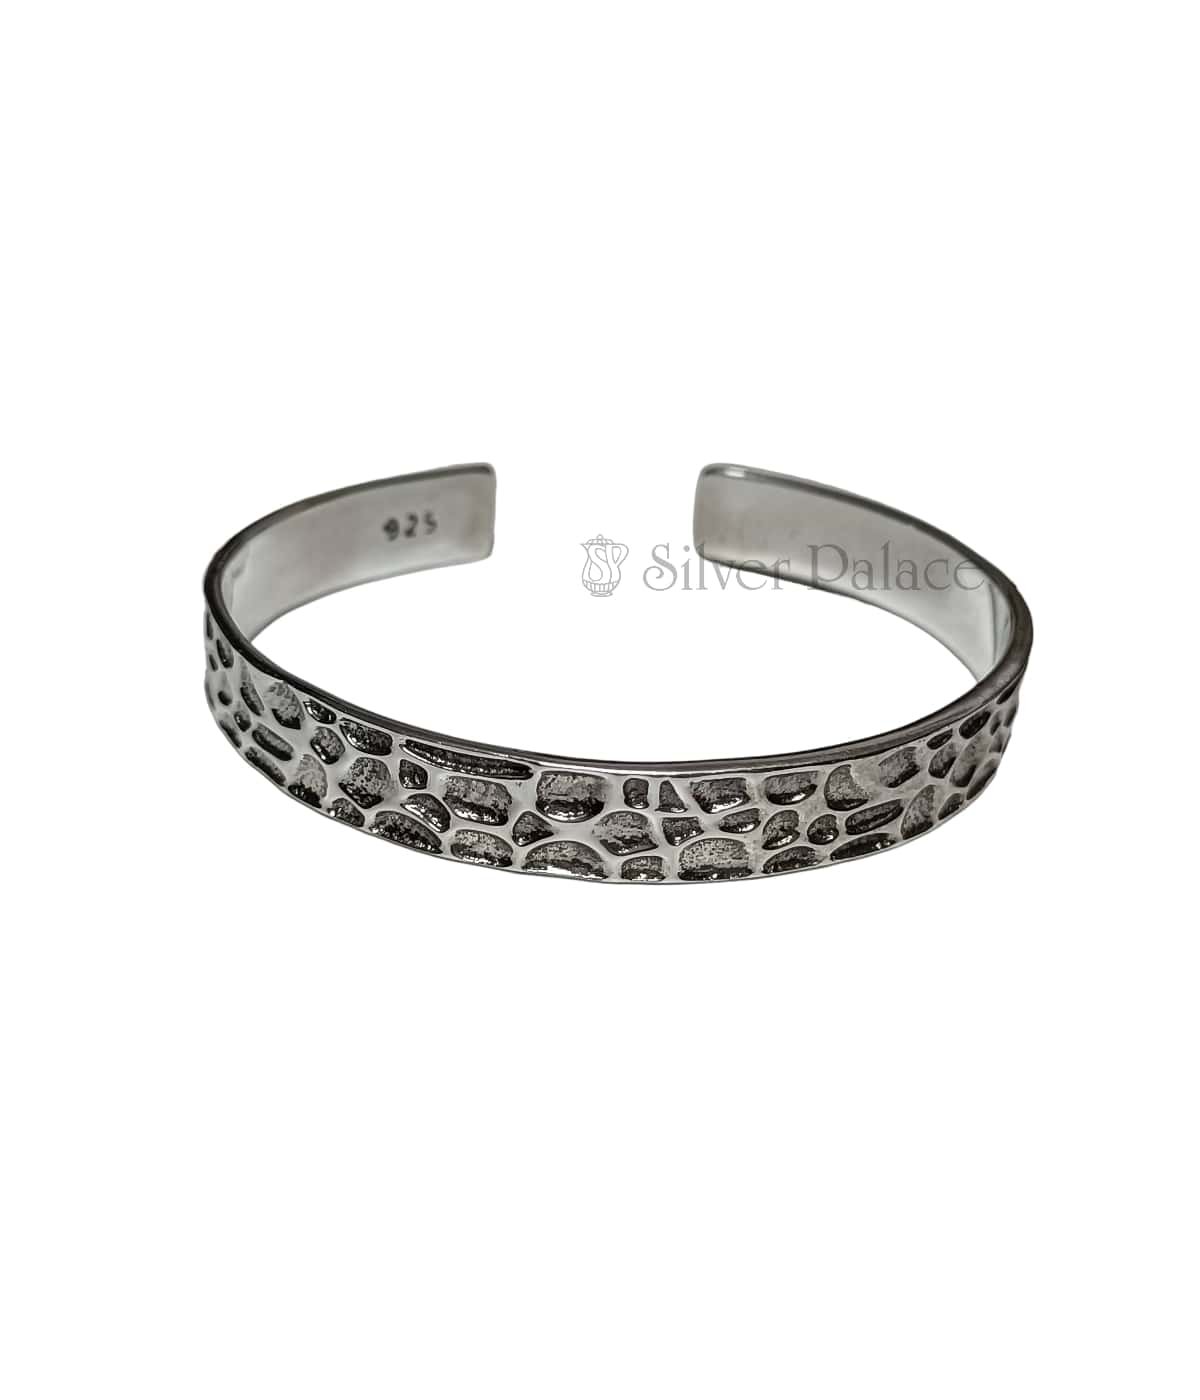 Personalized Name Engraved Silver Bracelet 